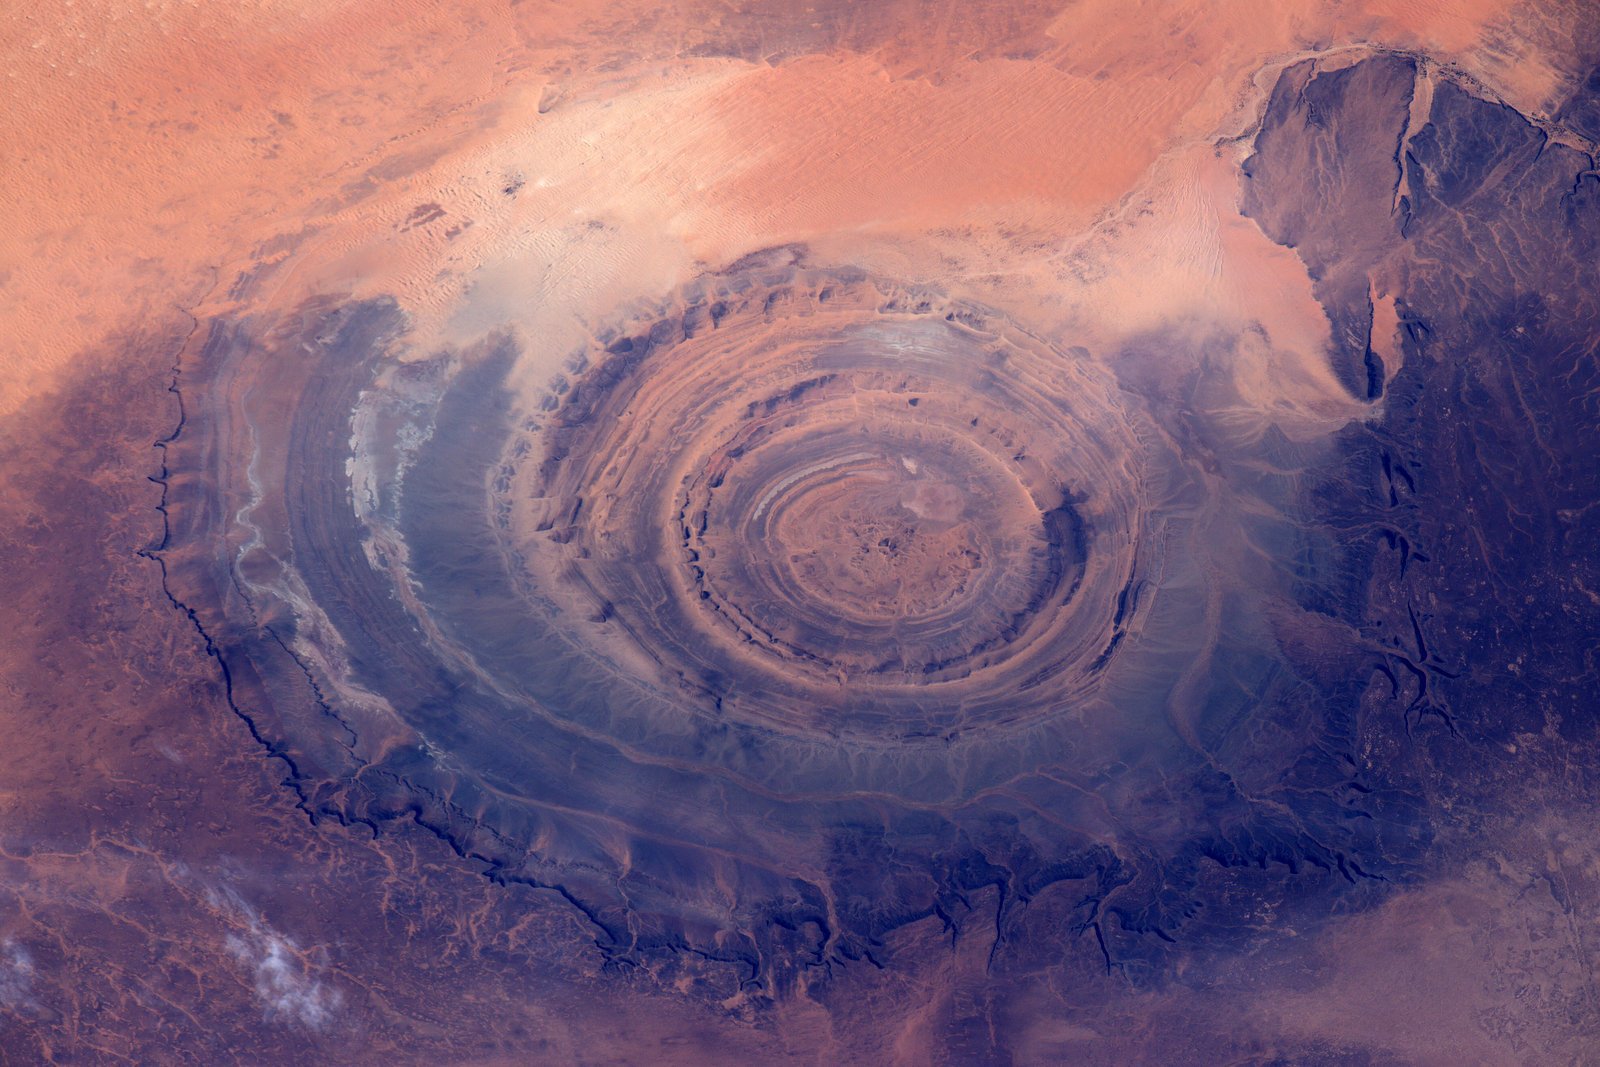 The Richat Structure or “Bulls Eye” in Mauritania.